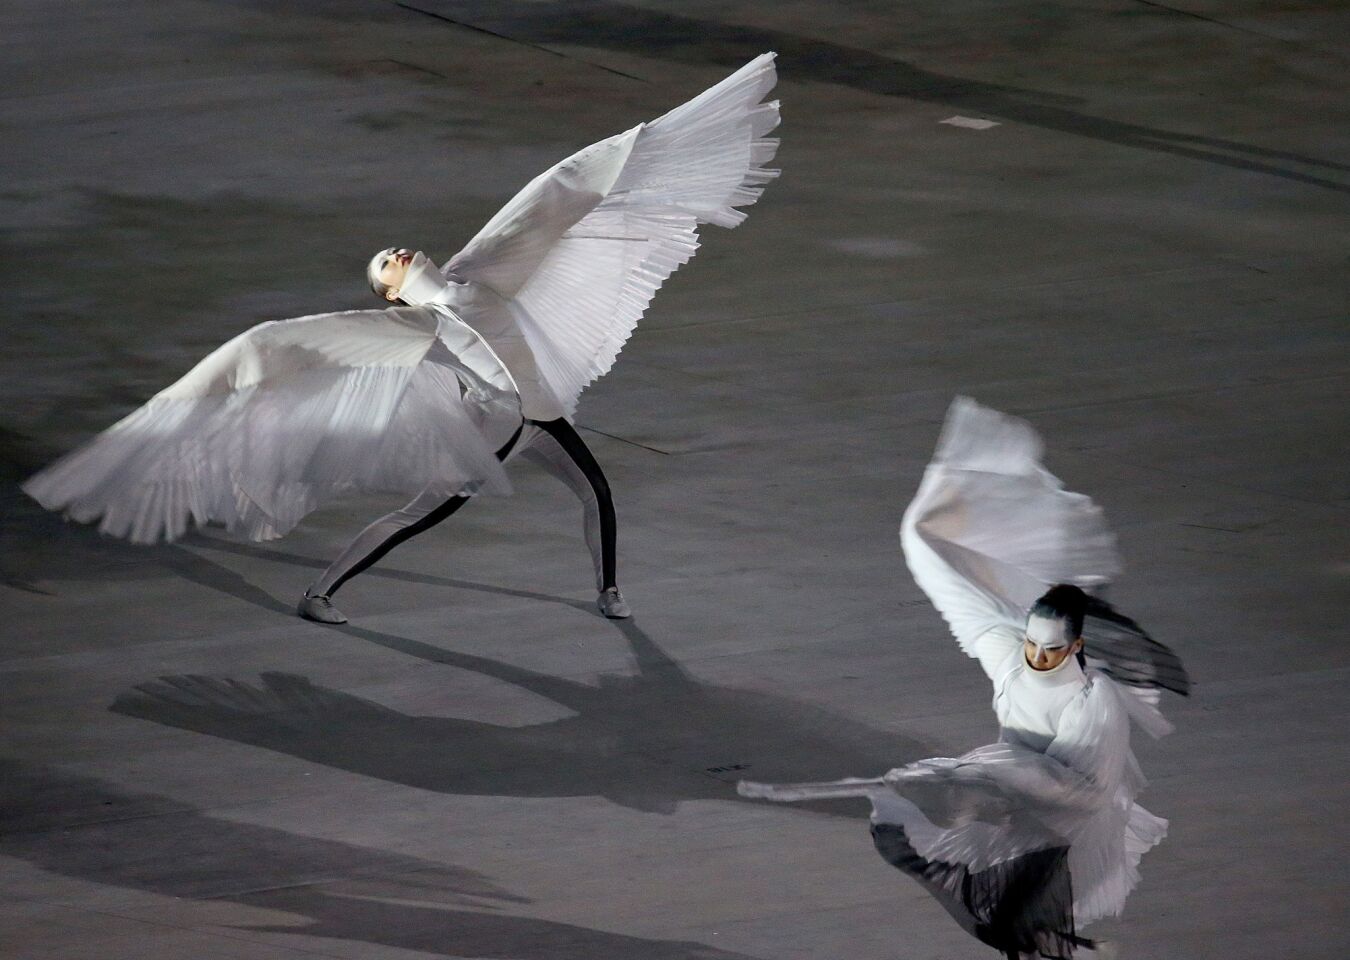 Dancers perform during a segment devoted to the 2018 Winter Olympics in PyeongChang, South Korea.